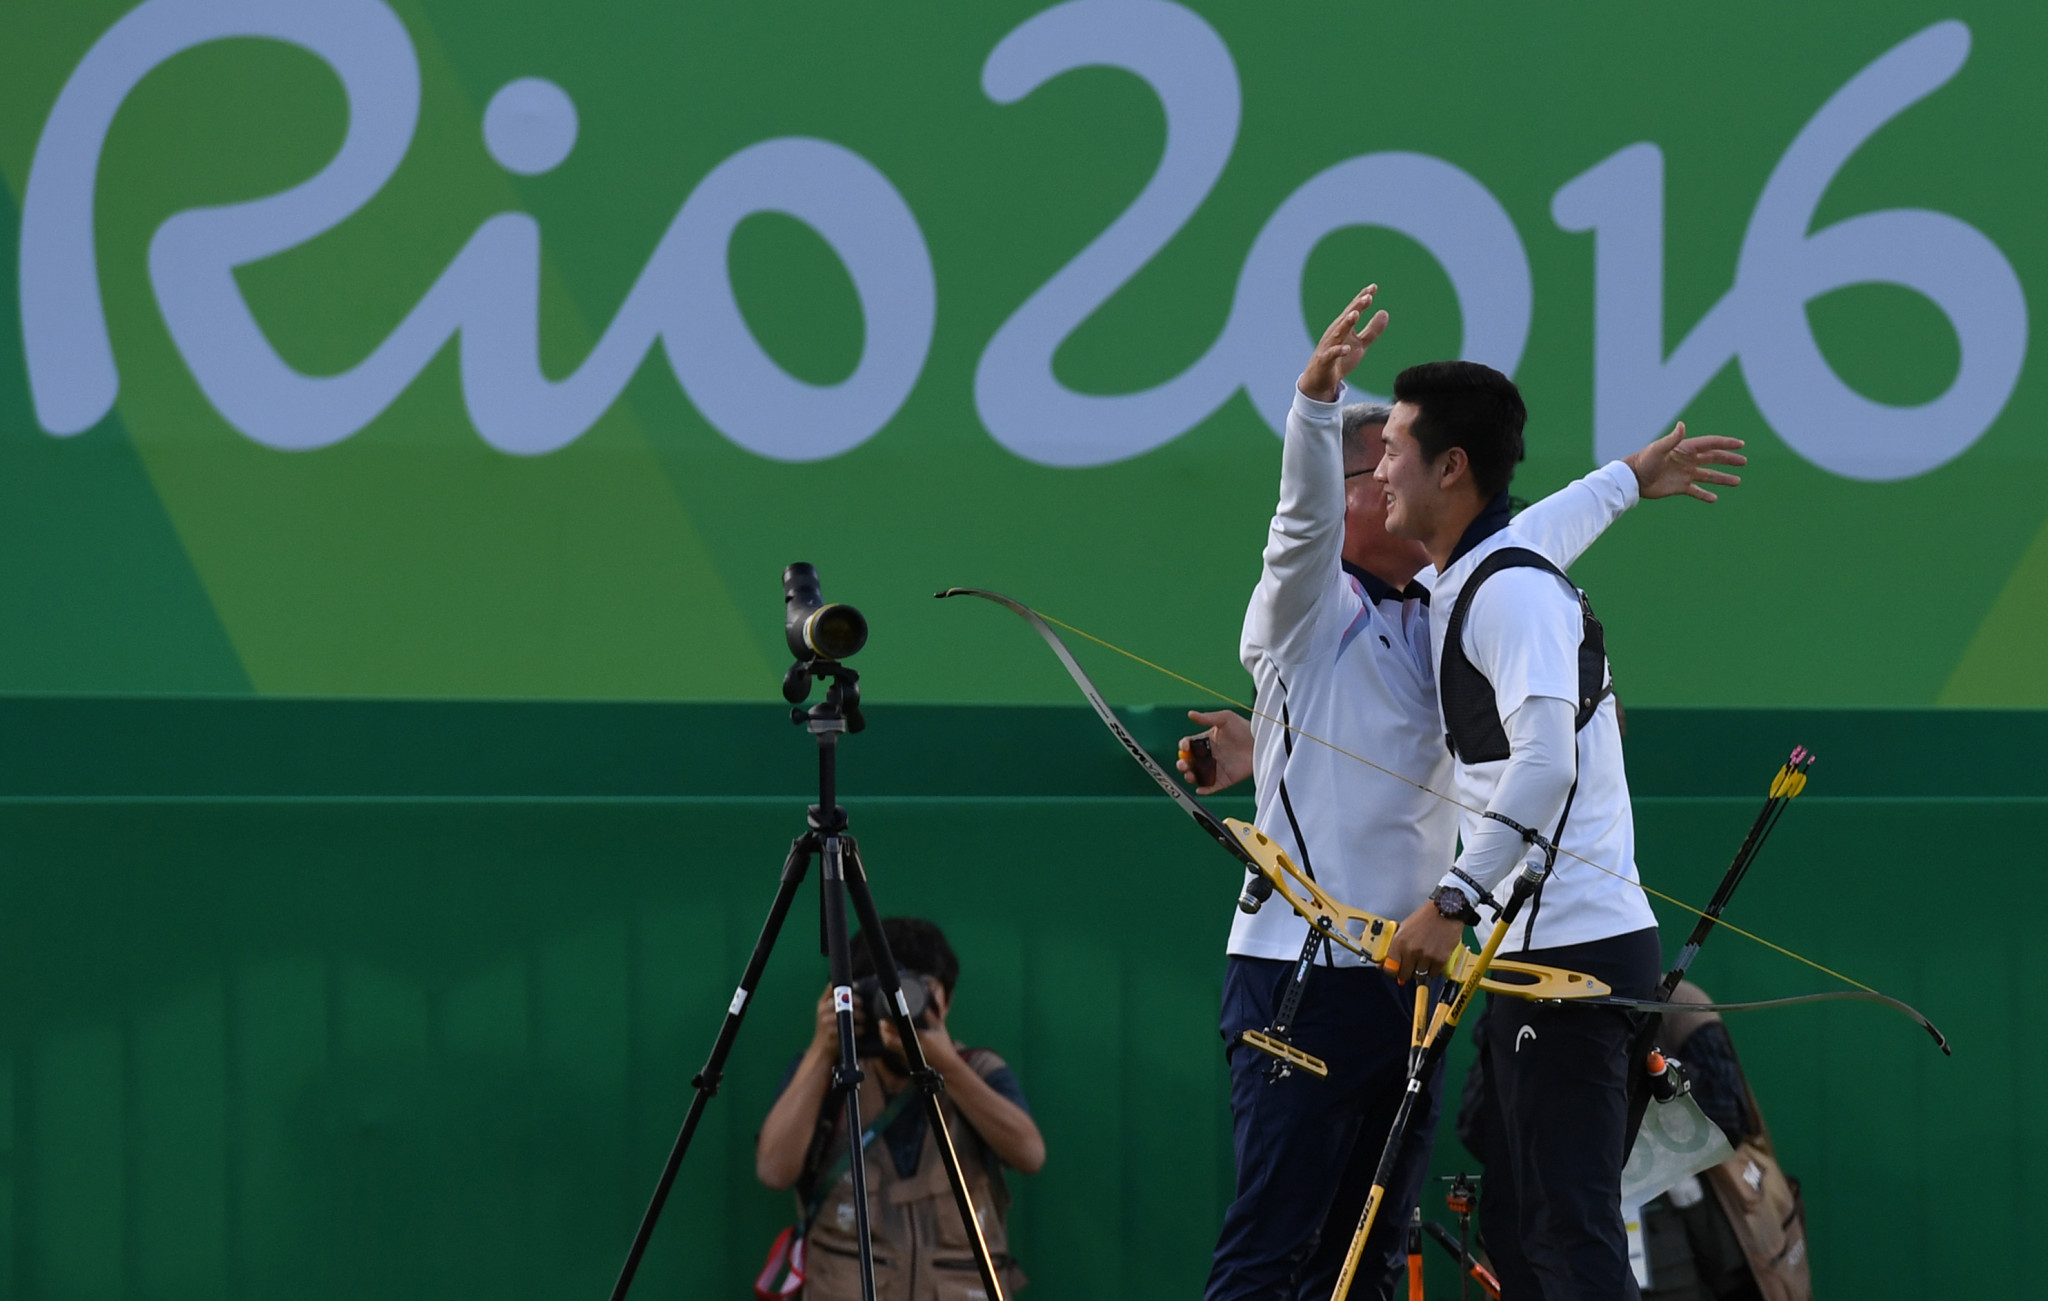 South Korean archers won all four Olympic titles at Rio 2016, finishing top of the sport's medal table for the eight consecutive Games, a record stretching back to Seoul 1988 ©Getty Images